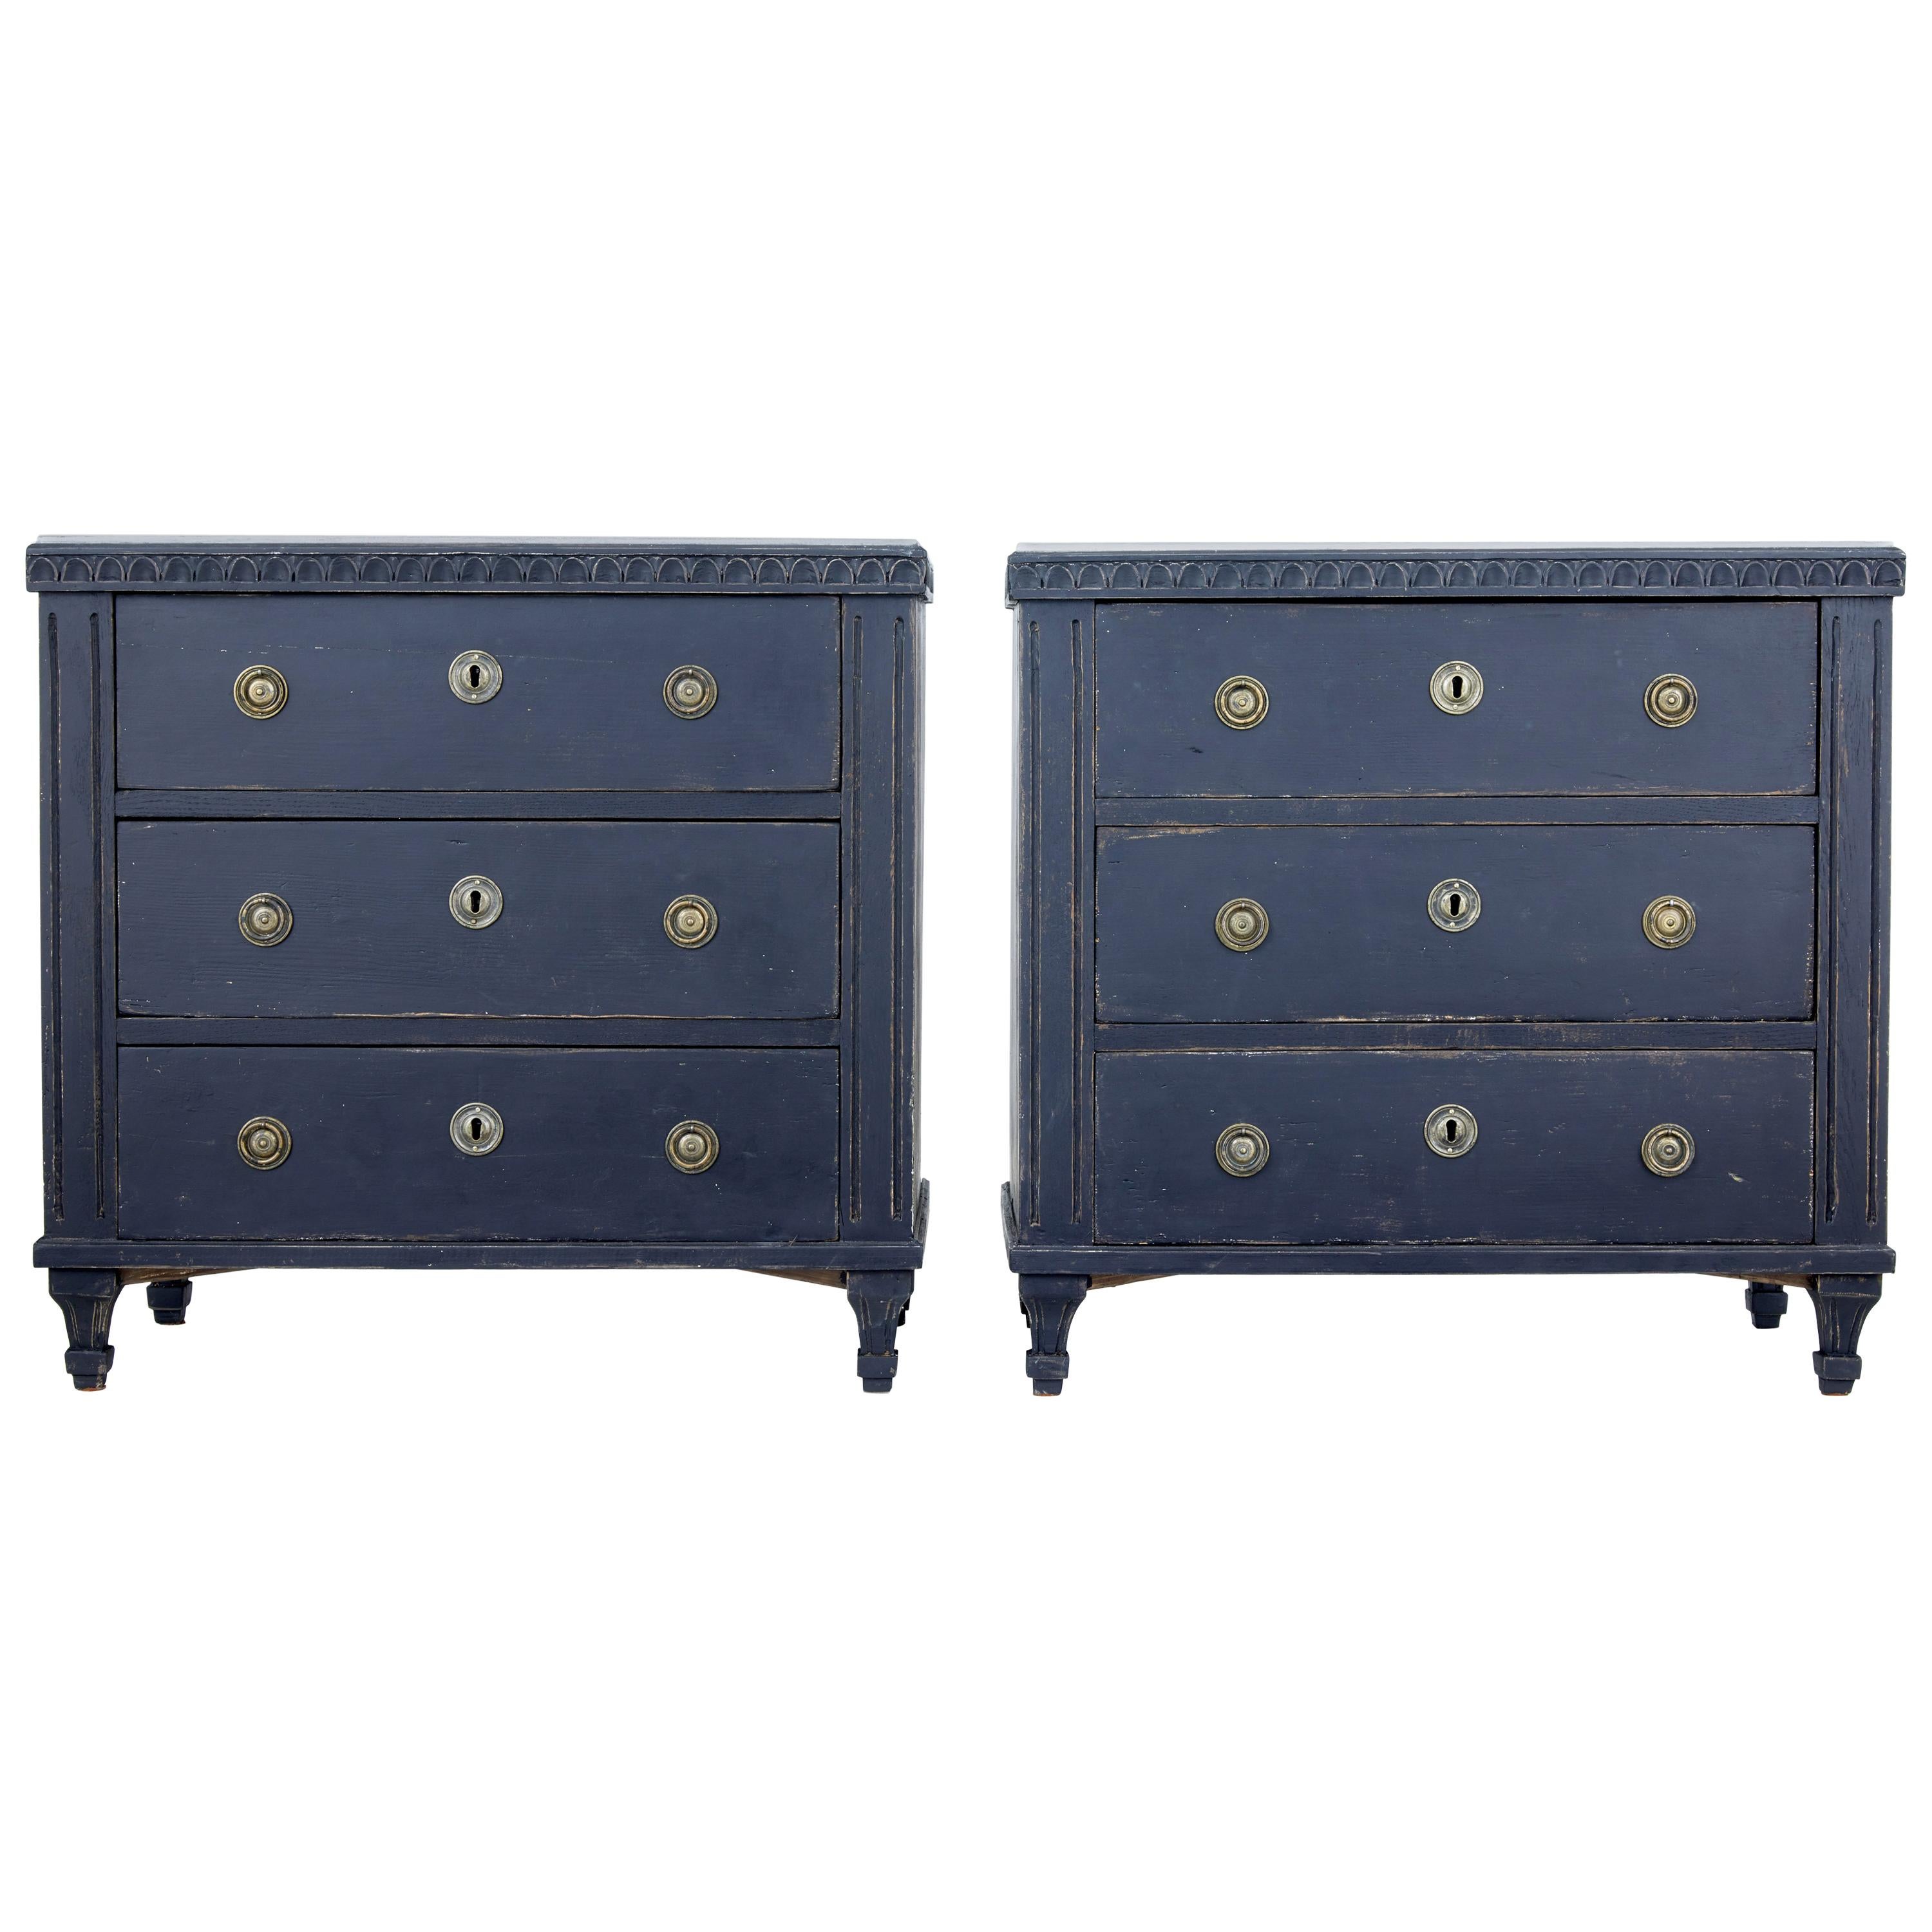 Pair of 19th Century Black Scandinavian Painted Chest of Drawers